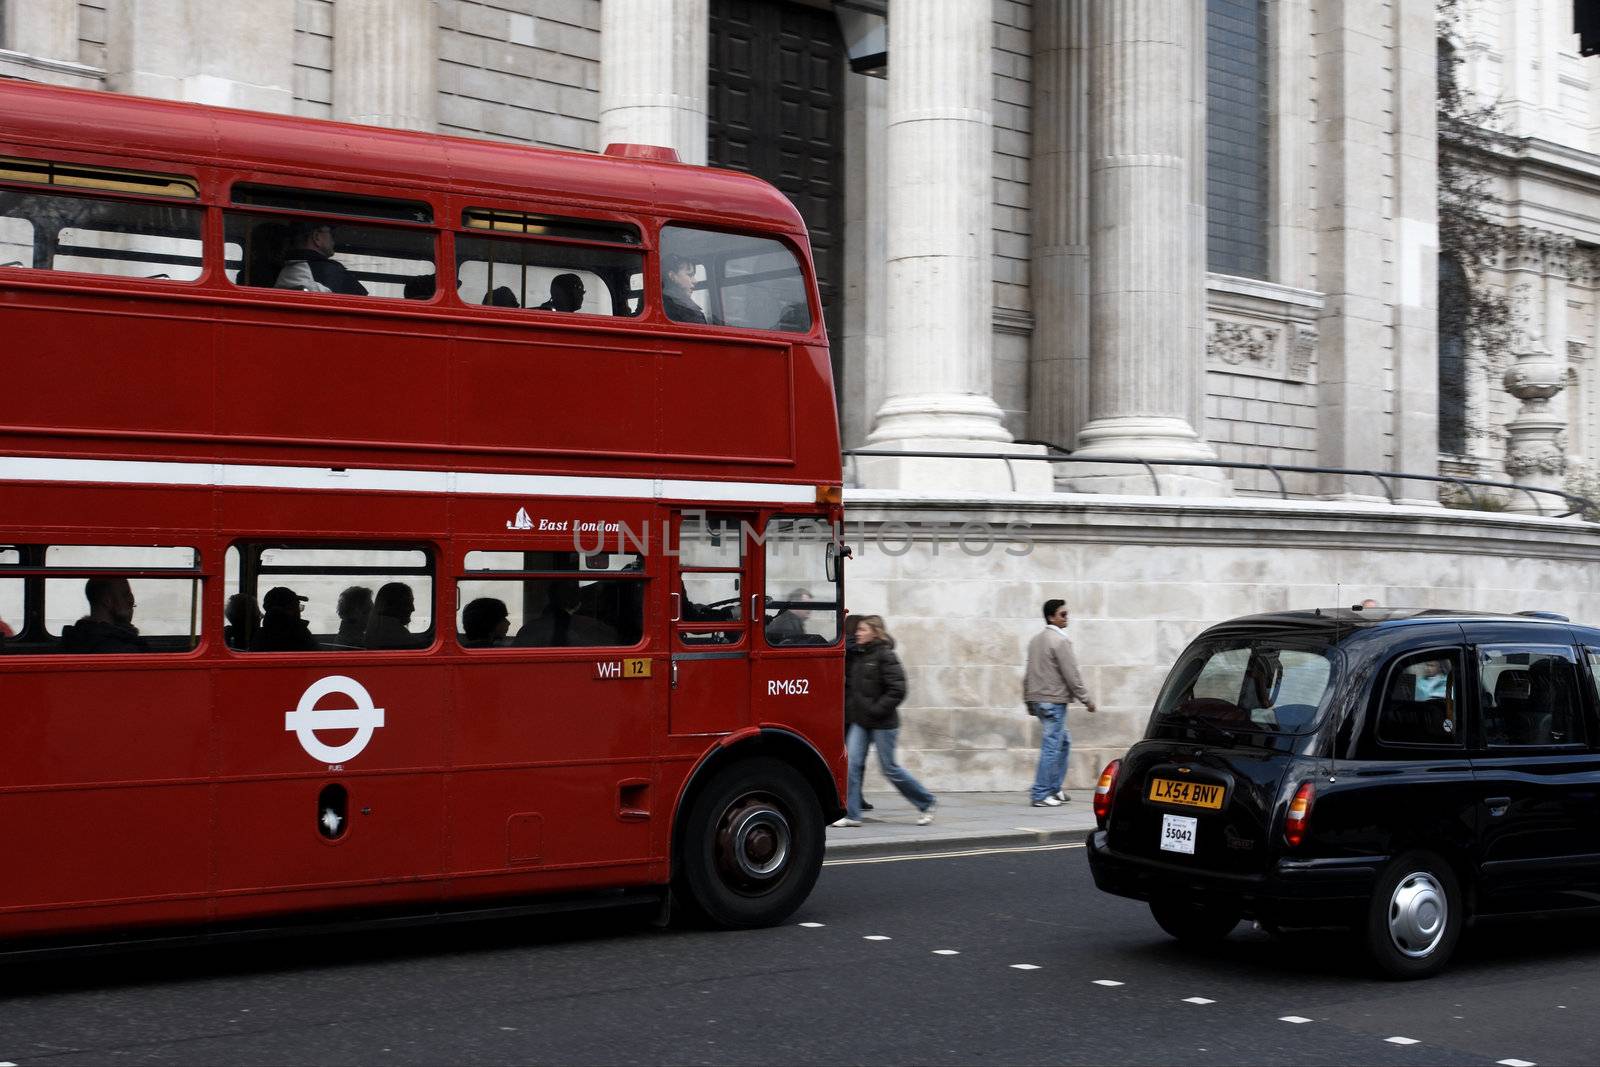 London Bus and Taxi by studiovitra